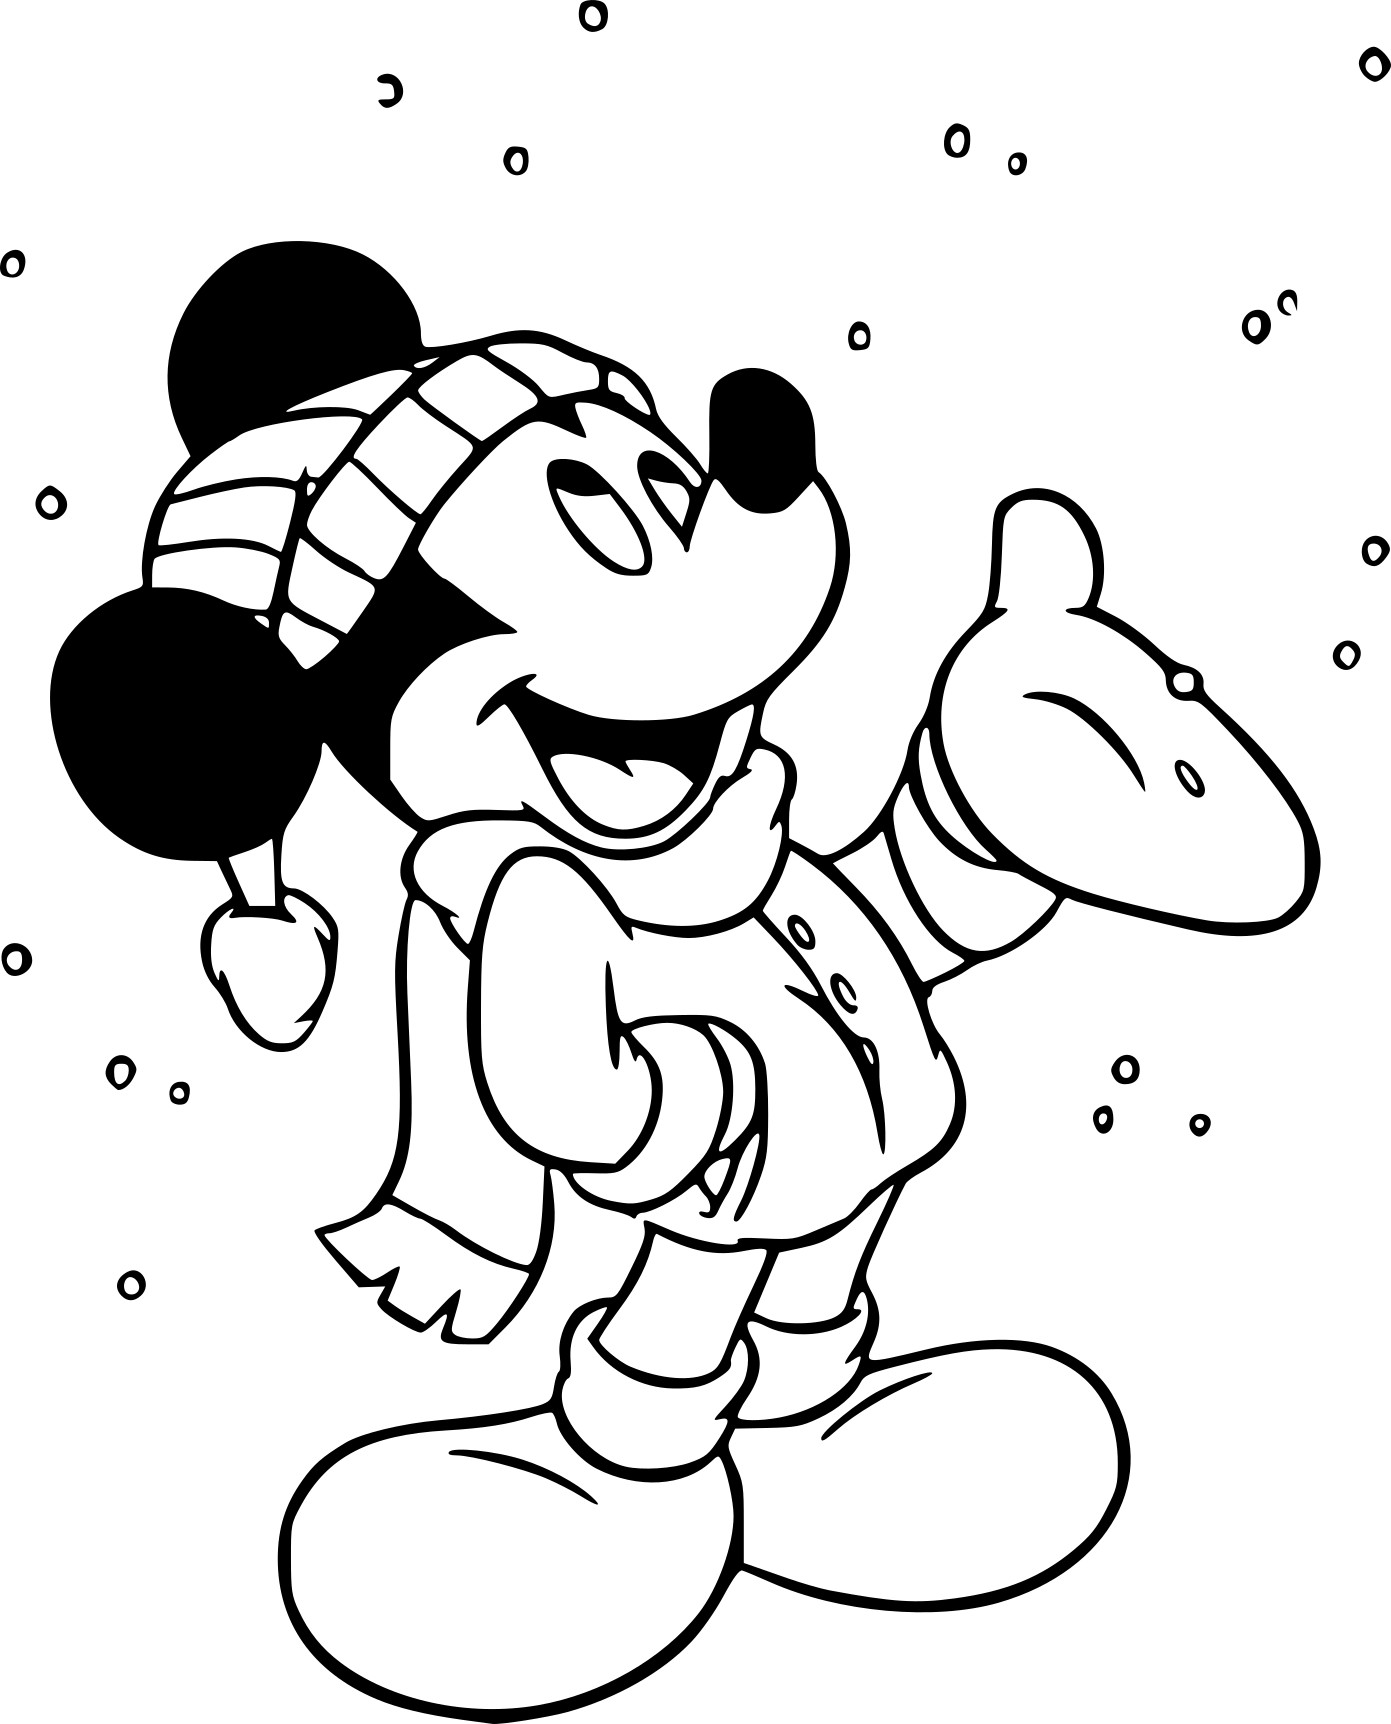 Mickey In Winter Under The Snow coloring page